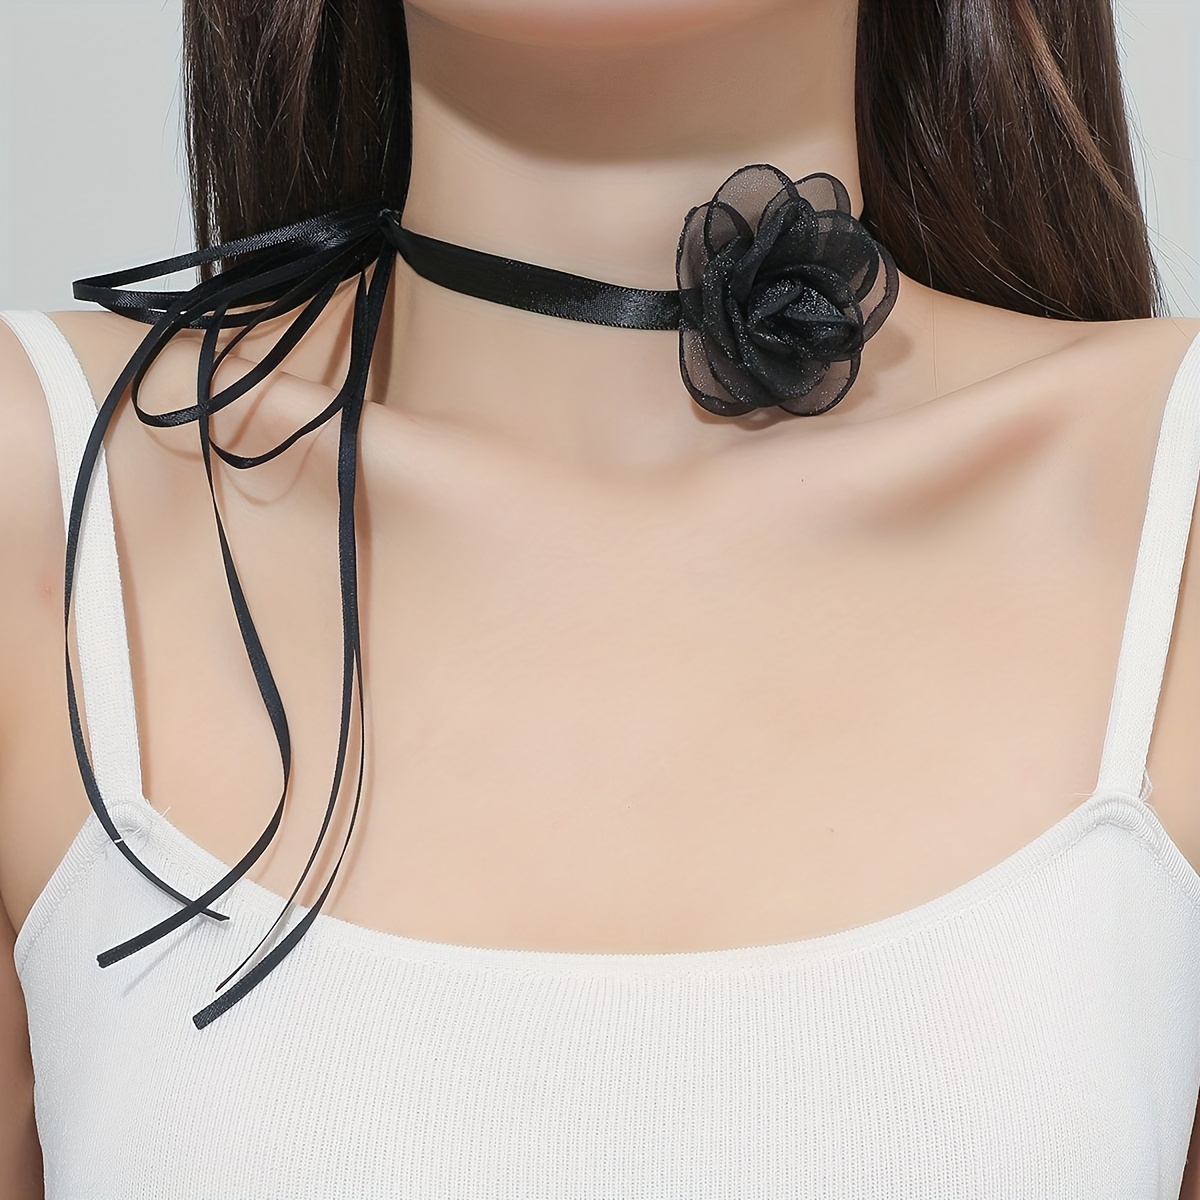 Fashion simple Velvet ribbon bow choker Necklace collar necklace